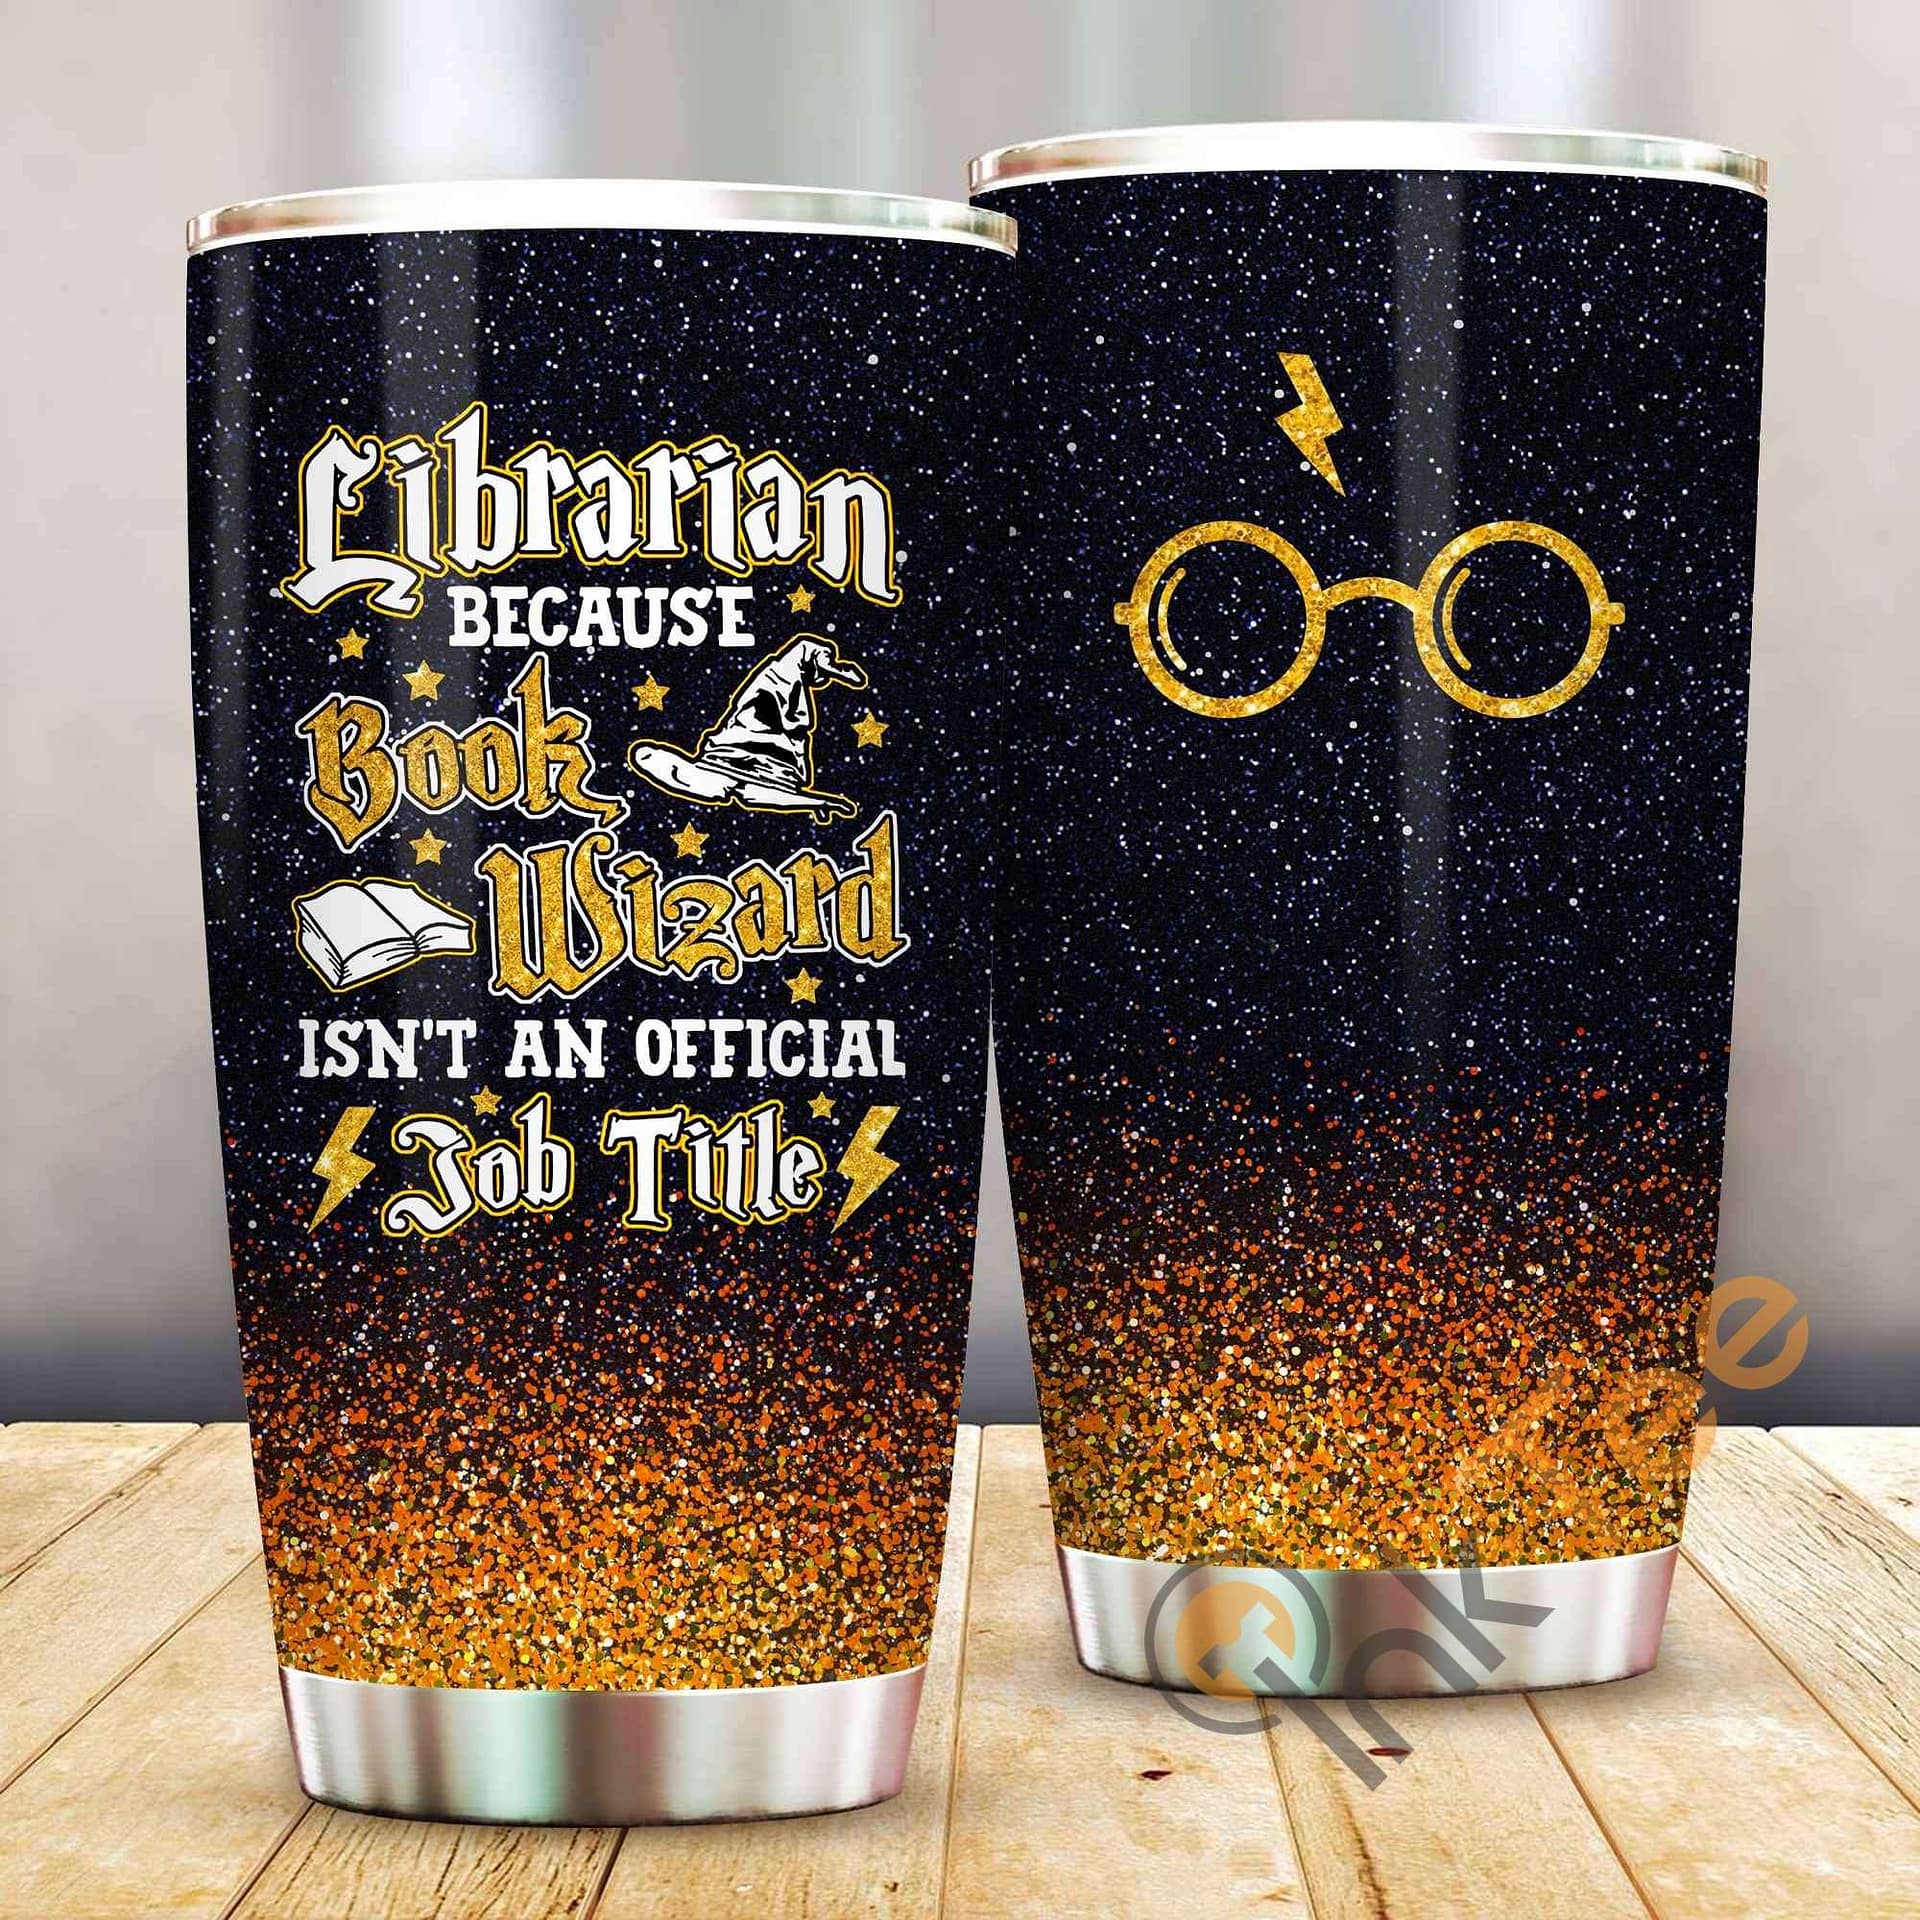 Librarian Because Book Wizard Isn't An Official Job Title Amazon Best Seller Sku 3934 Stainless Steel Tumbler